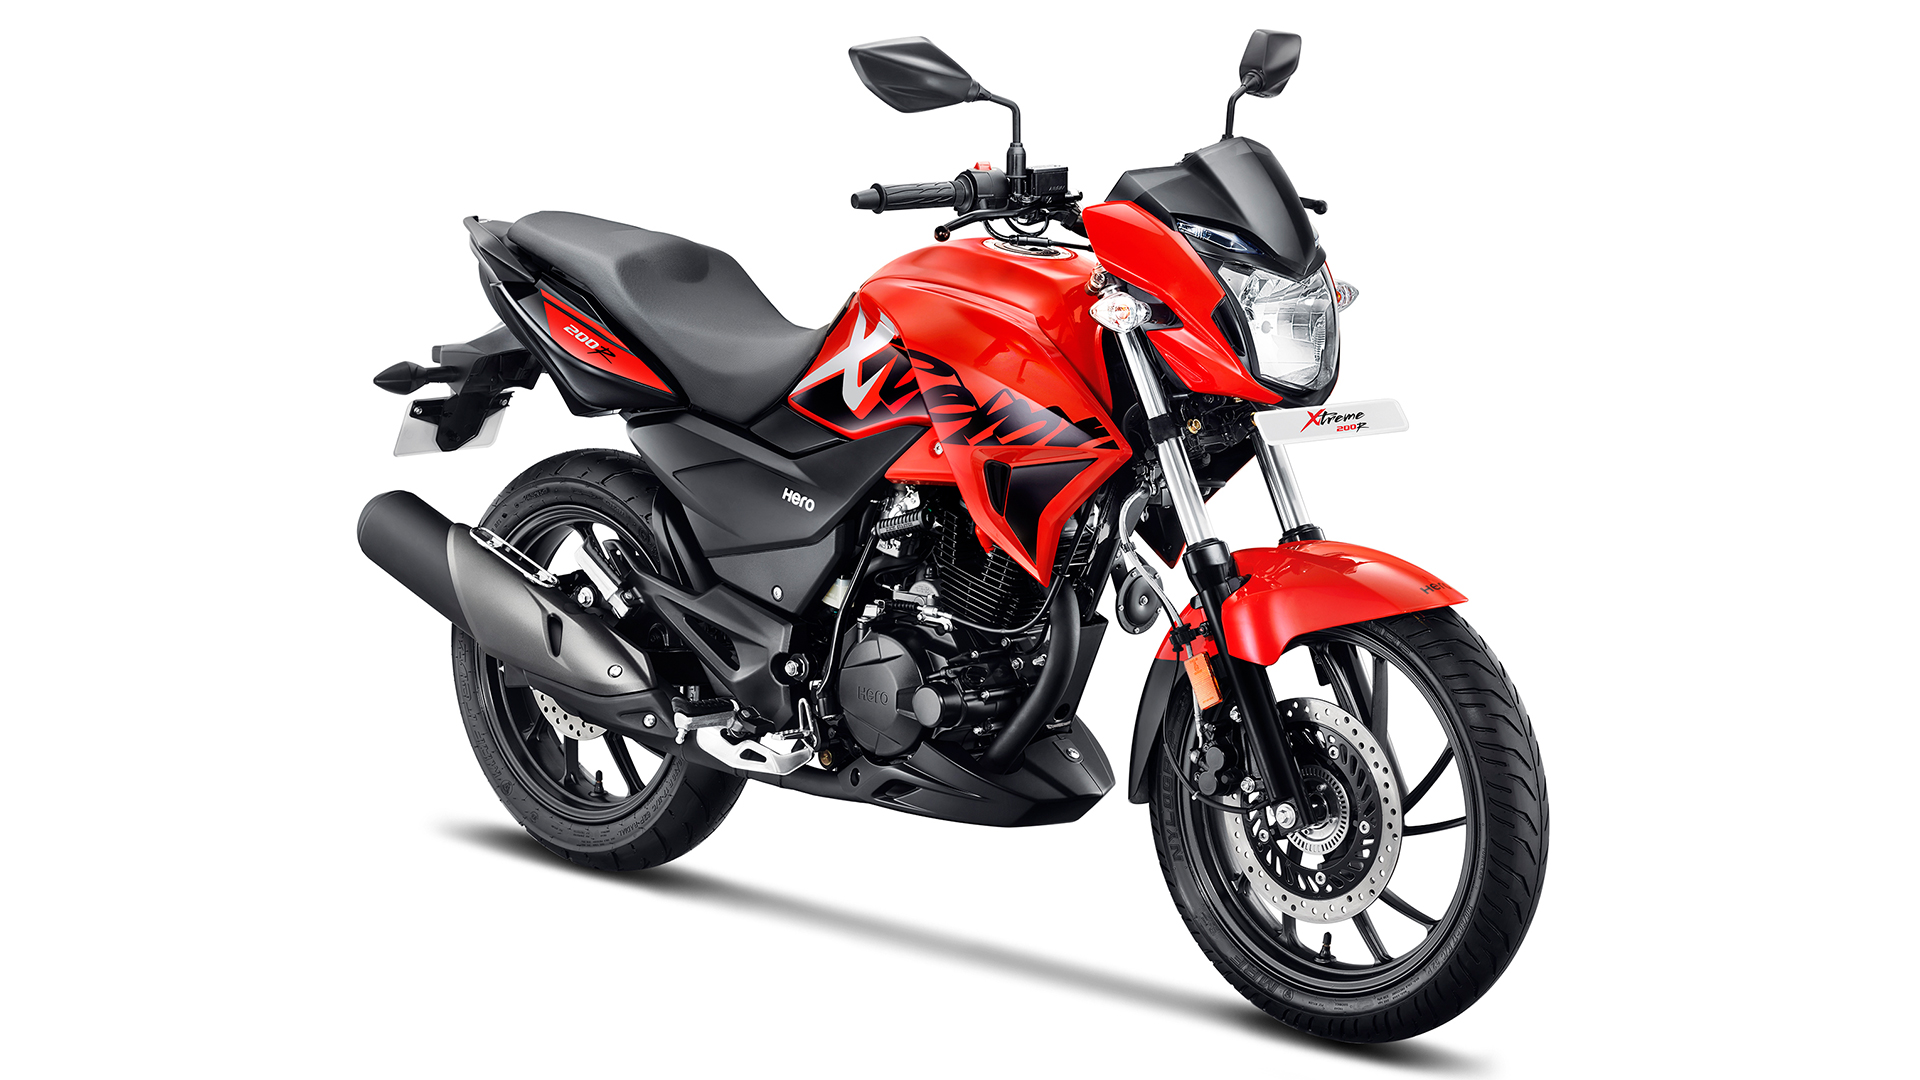 Top Speed, 120 Kmph - Hero Xtreme 200r Abs , HD Wallpaper & Backgrounds